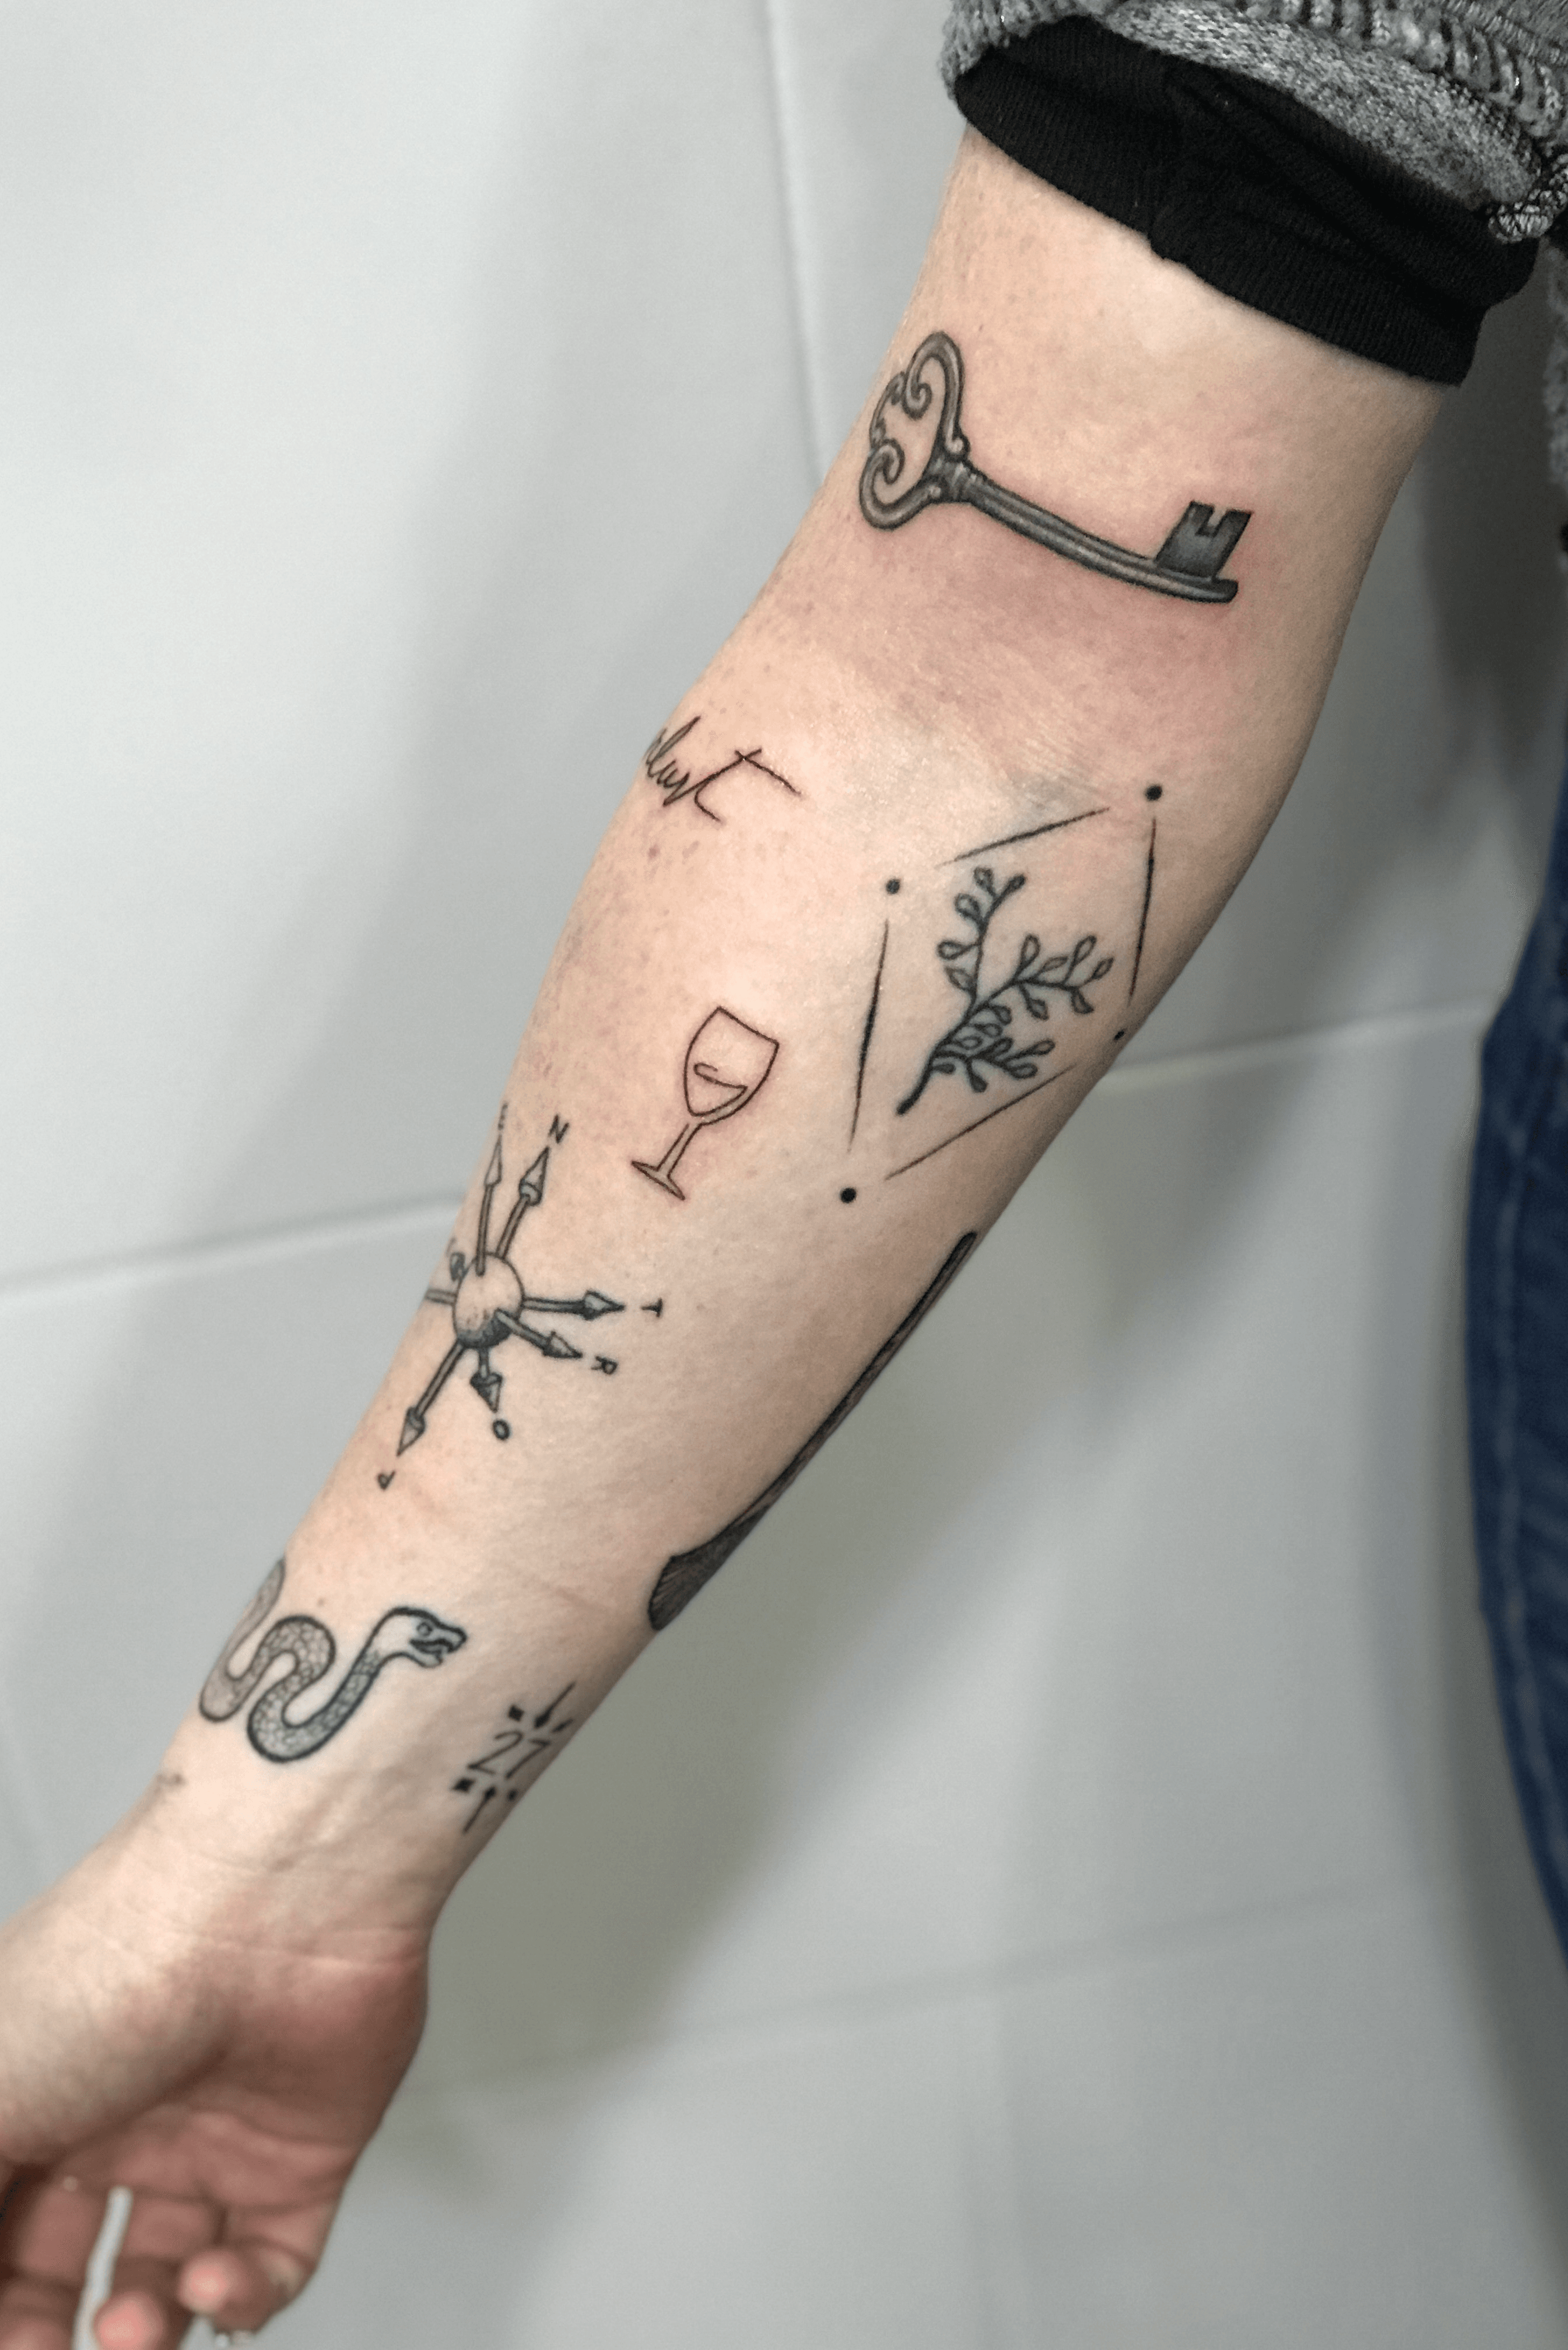 What are the best minimalist tattoos  Quora